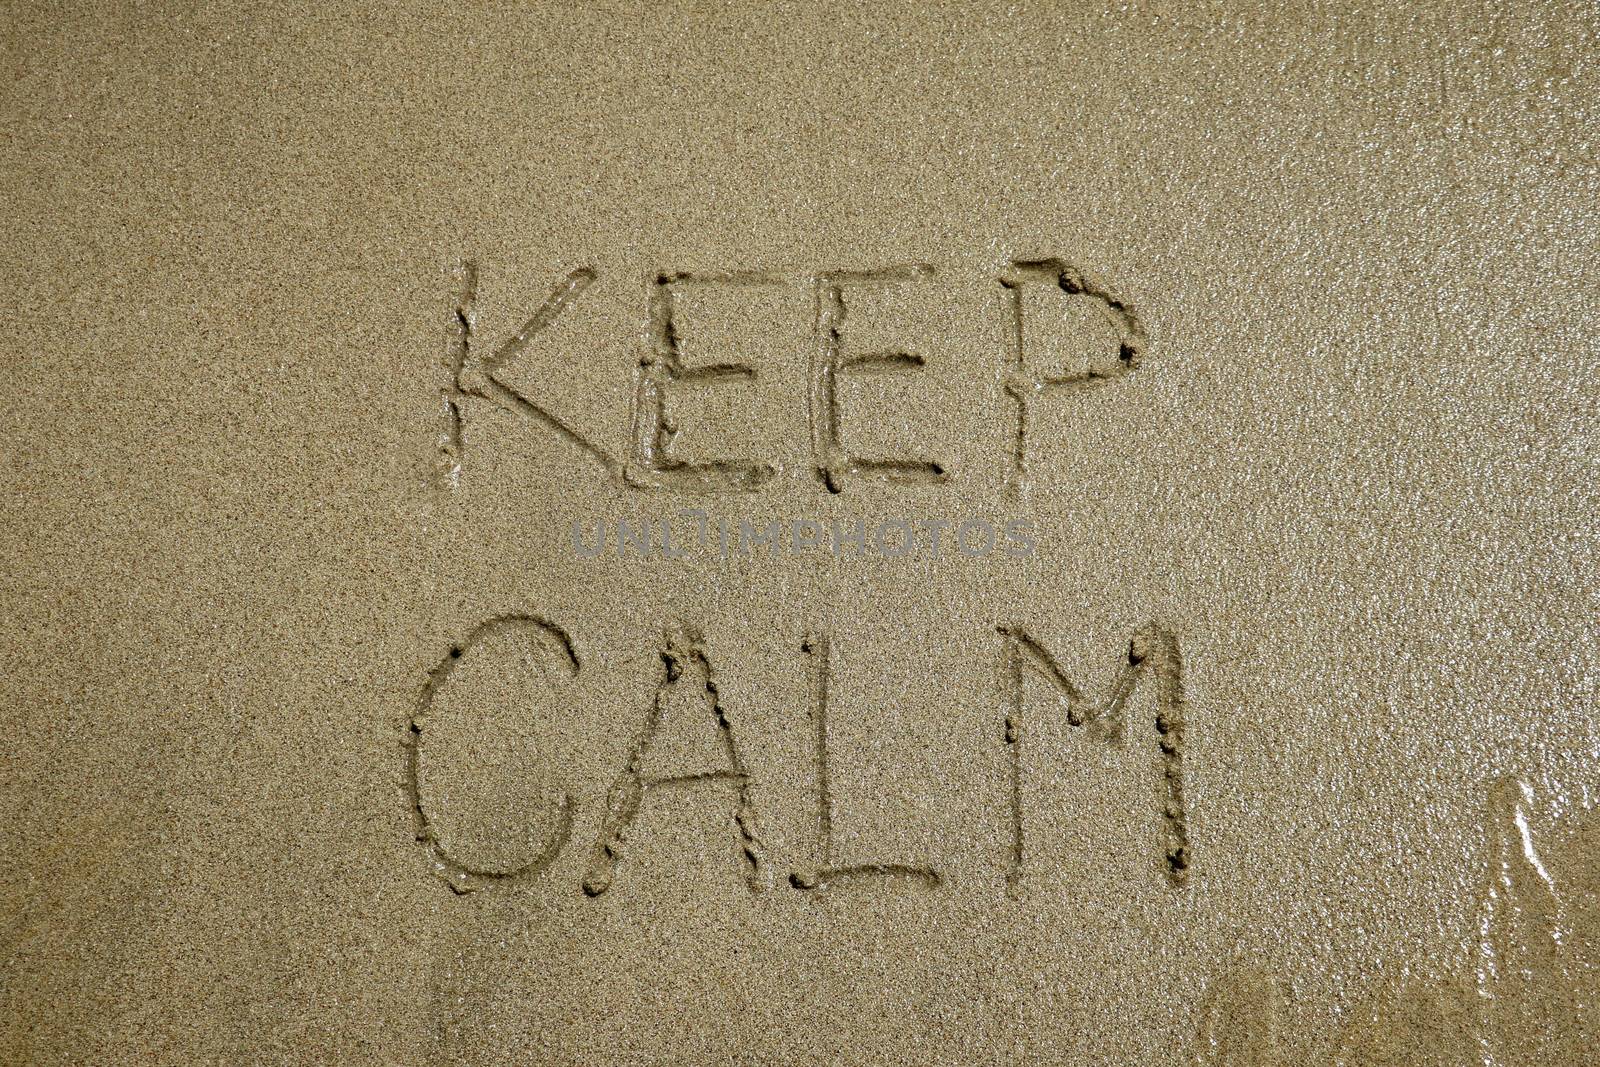 The sign keep calm written on sand, stress free concept.